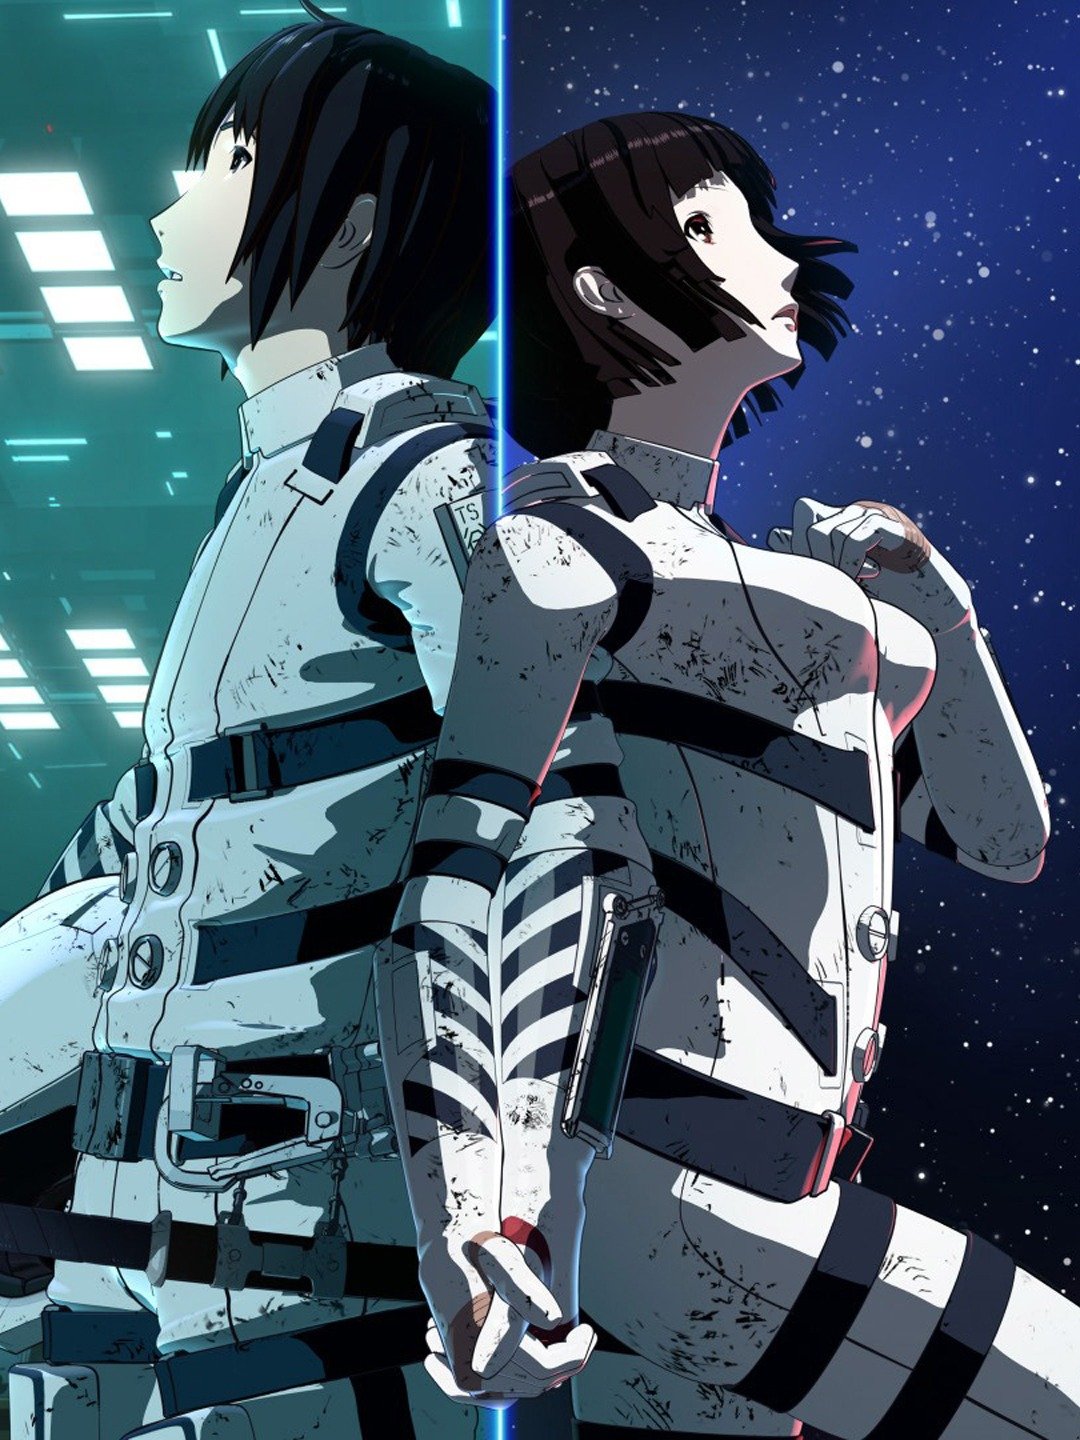 Netflixs Knights of Sidonia Trailer Visuals Released  News  Anime News  Network